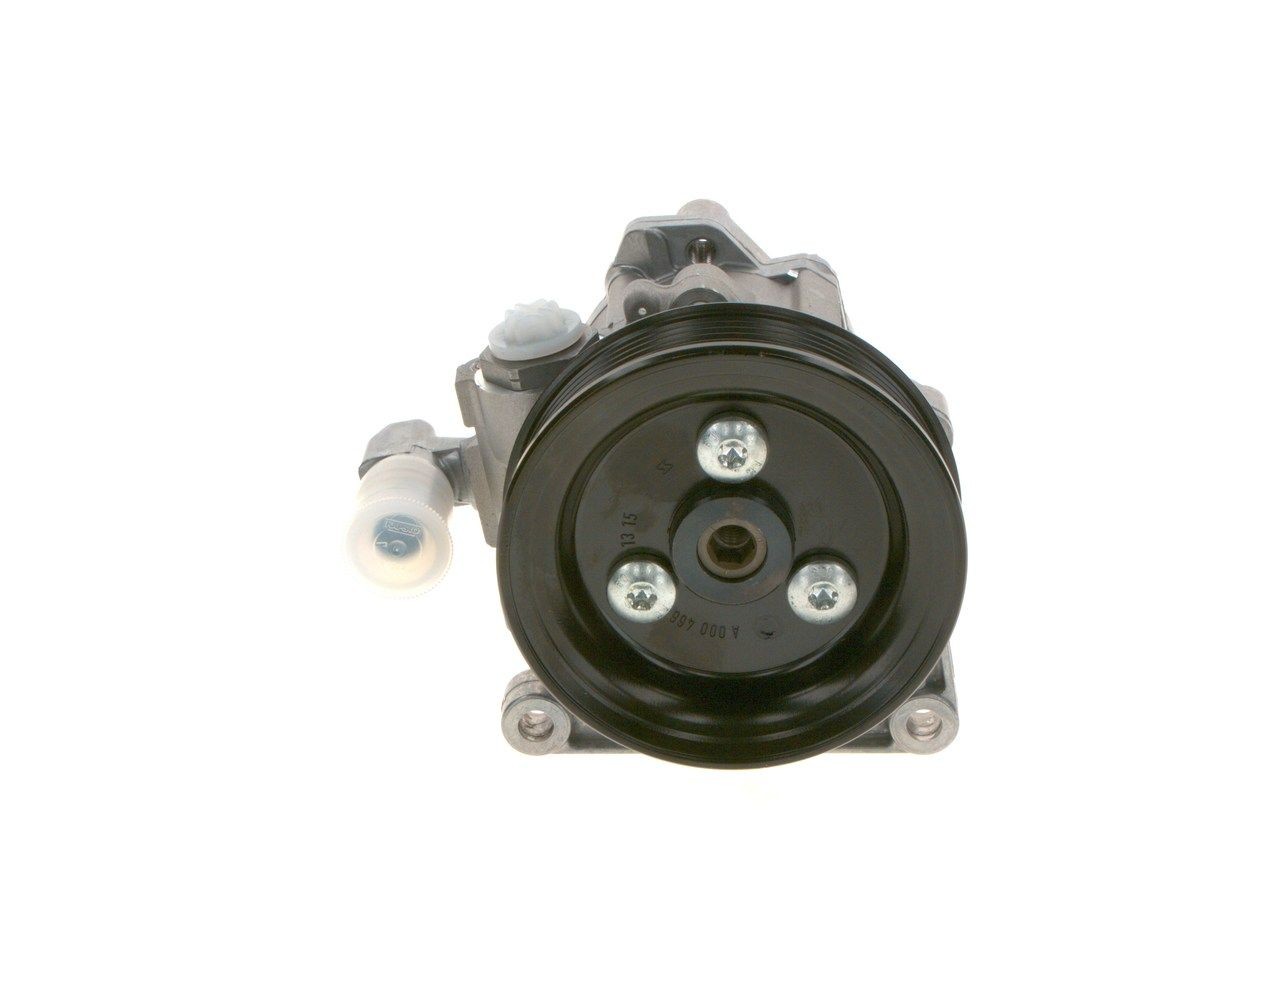 BOSCH Hydraulic steering pump K S00 000 632 suitable for ML W163